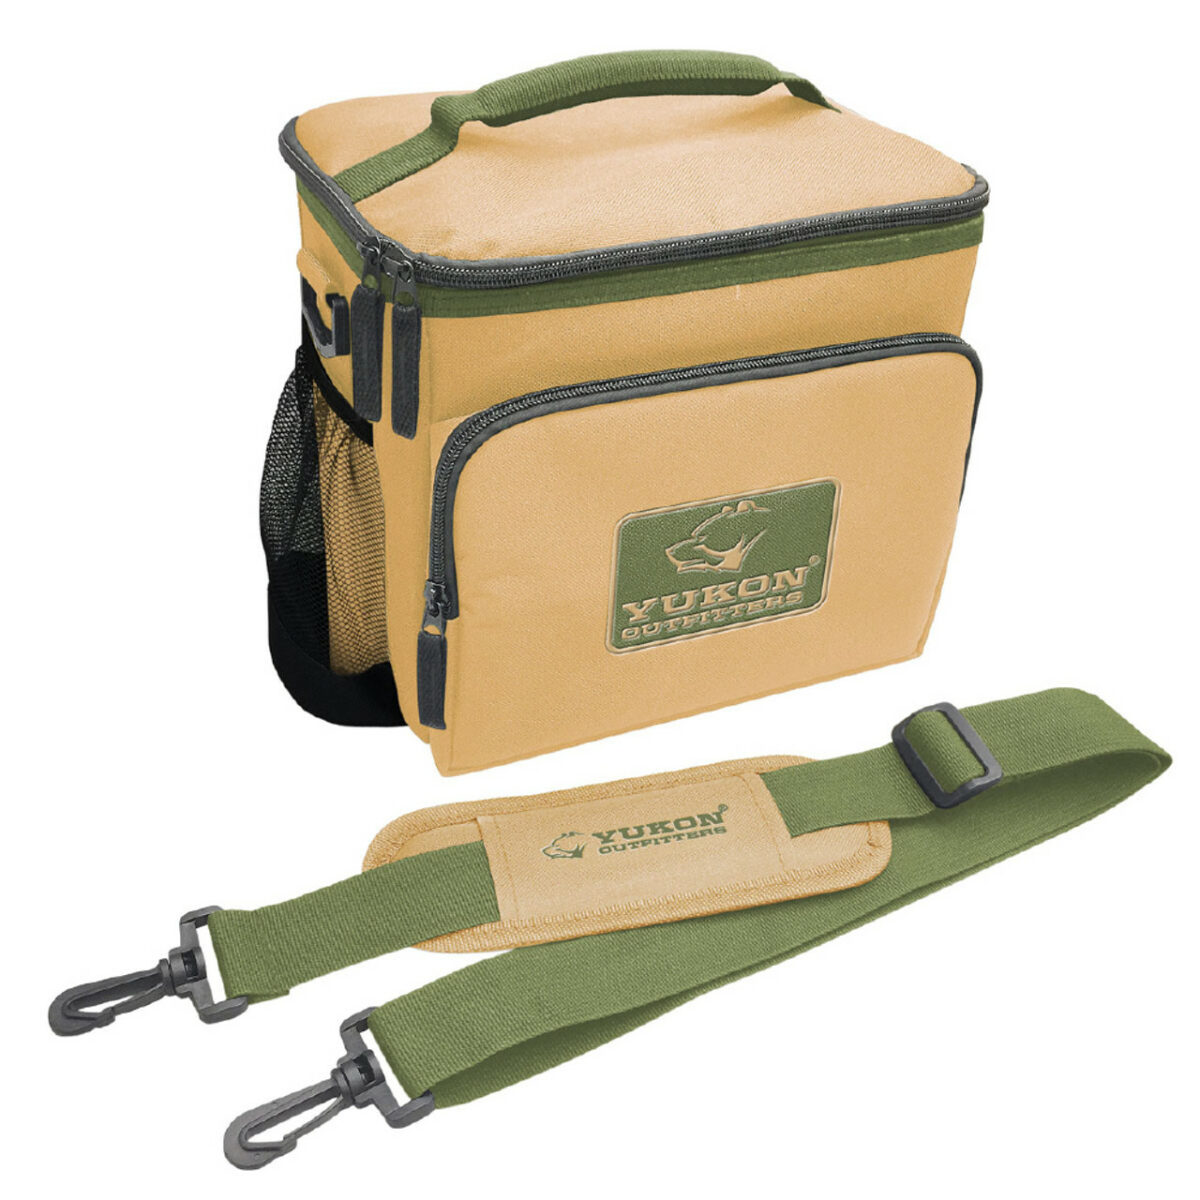 Yukon Outfitters Tan Green Lunch Box Cooler